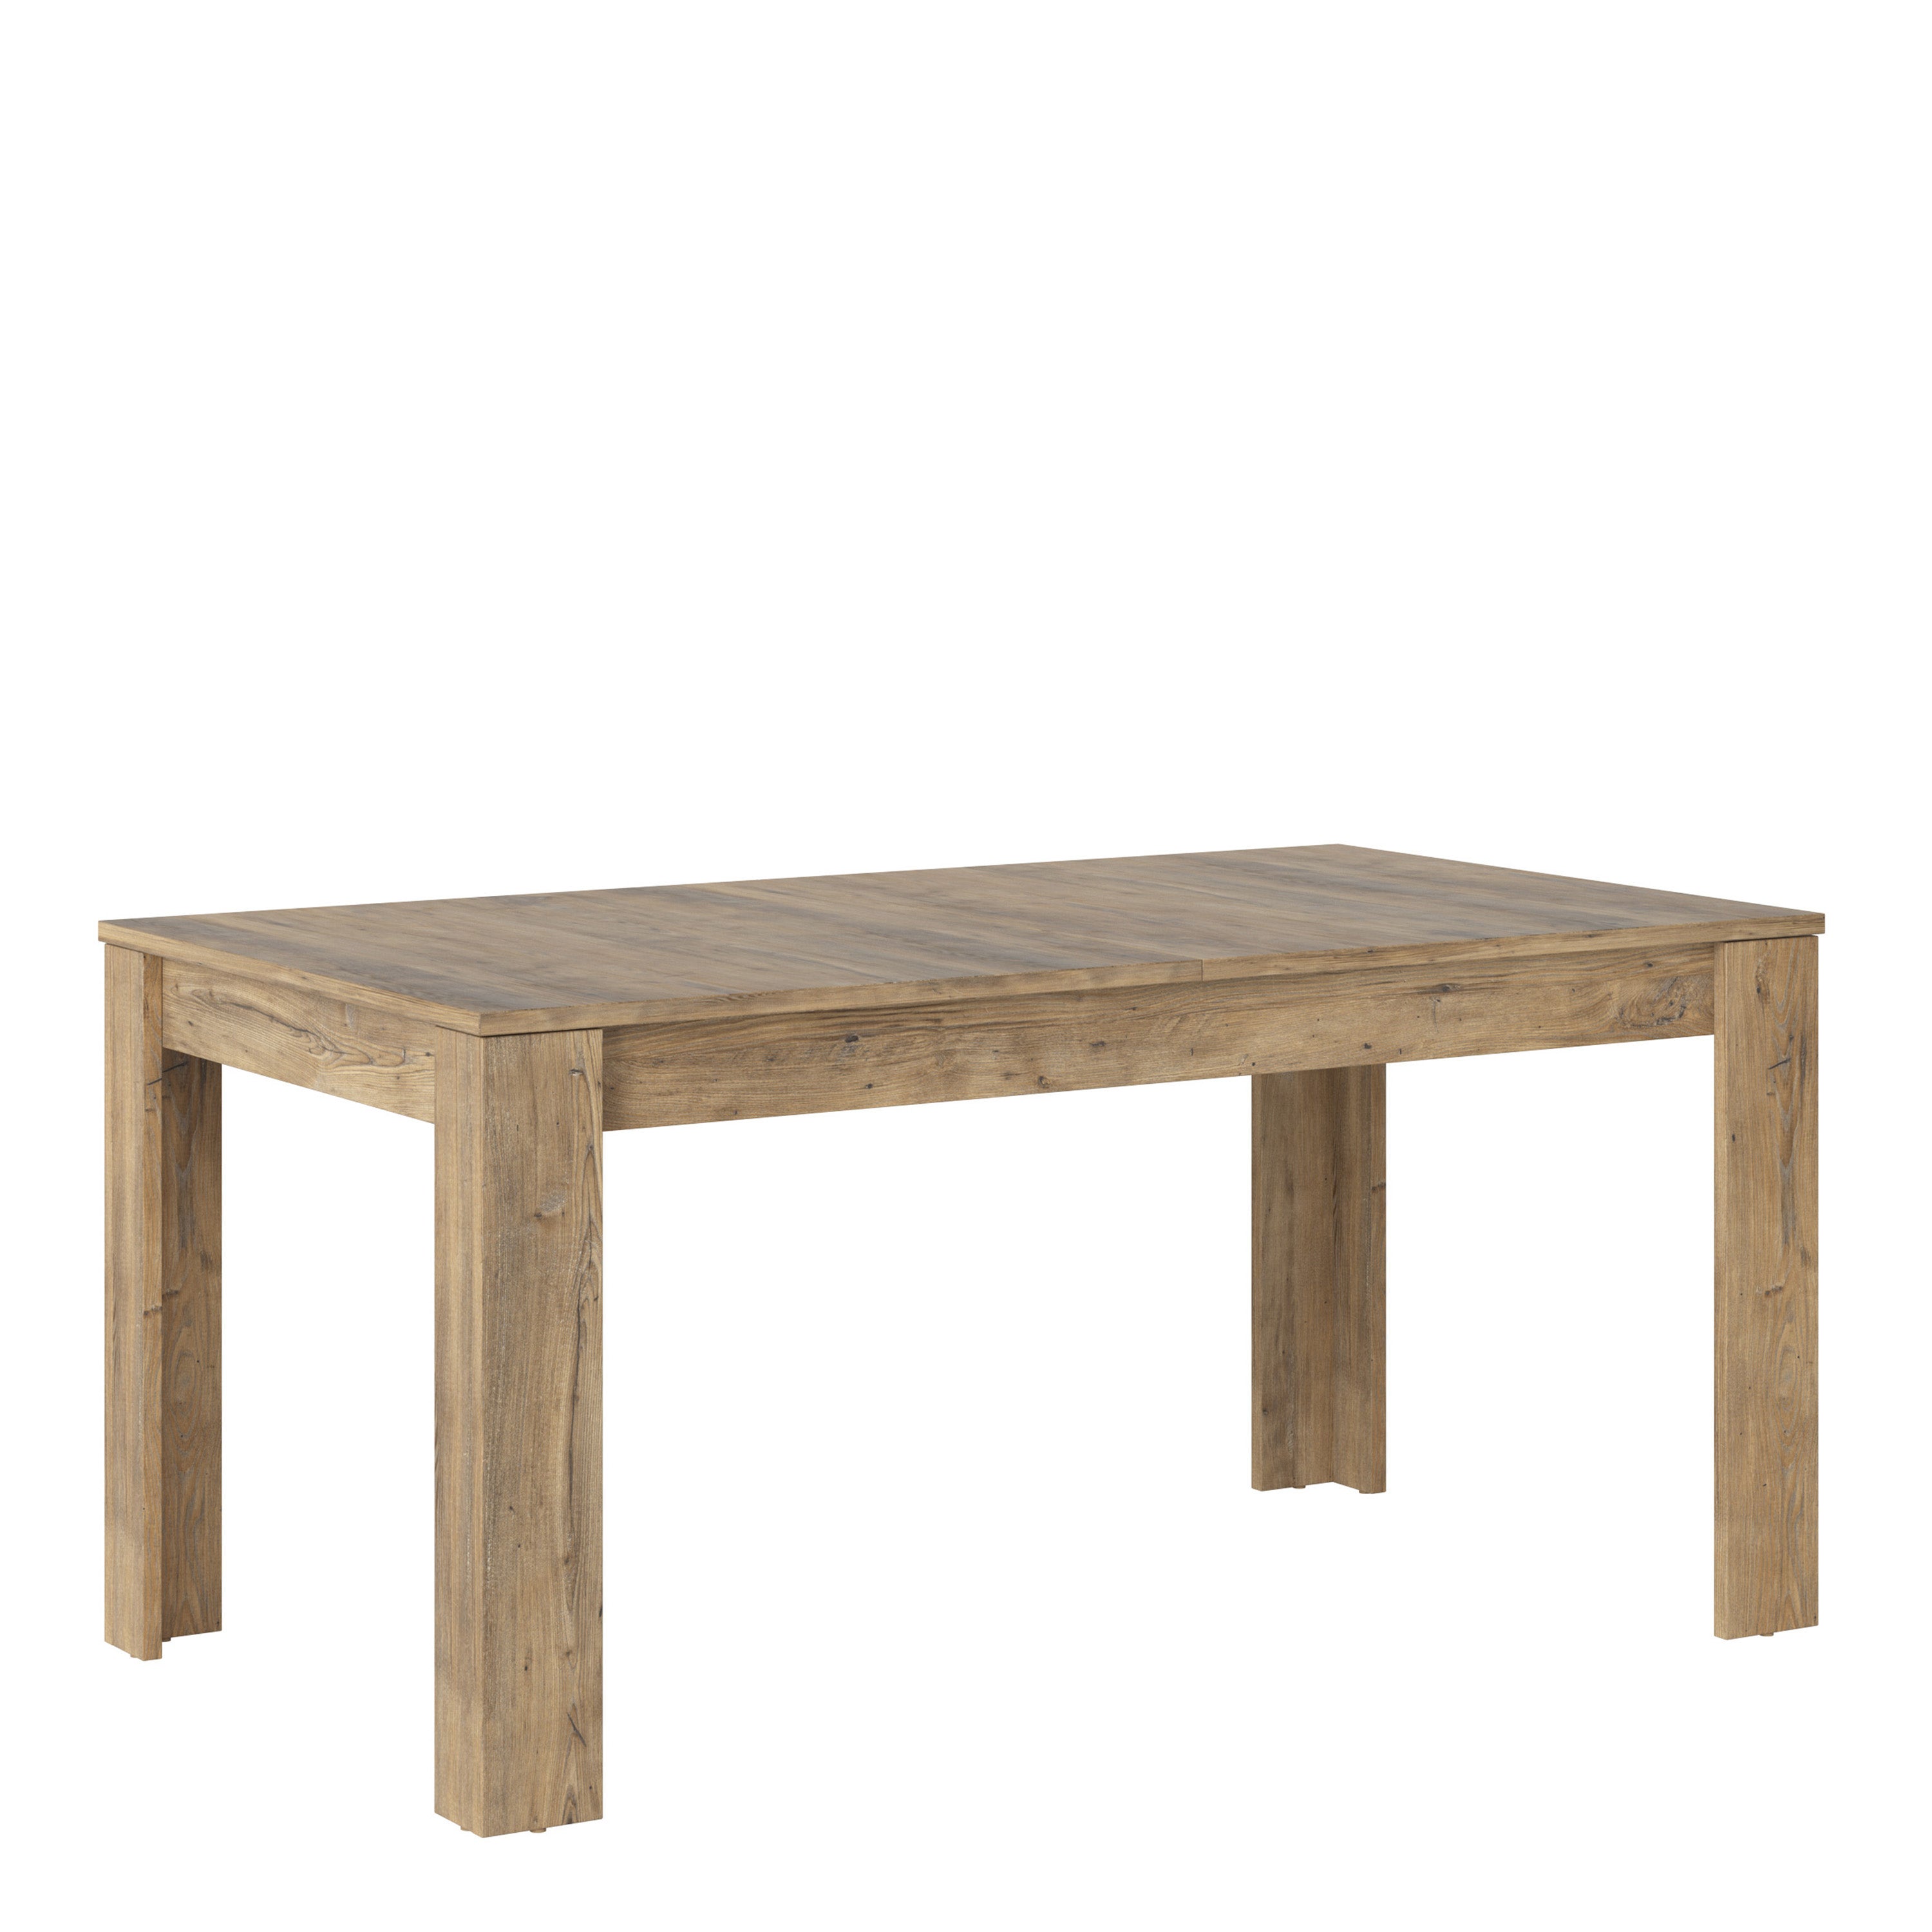 Image of Rapallo Extending Dining Table